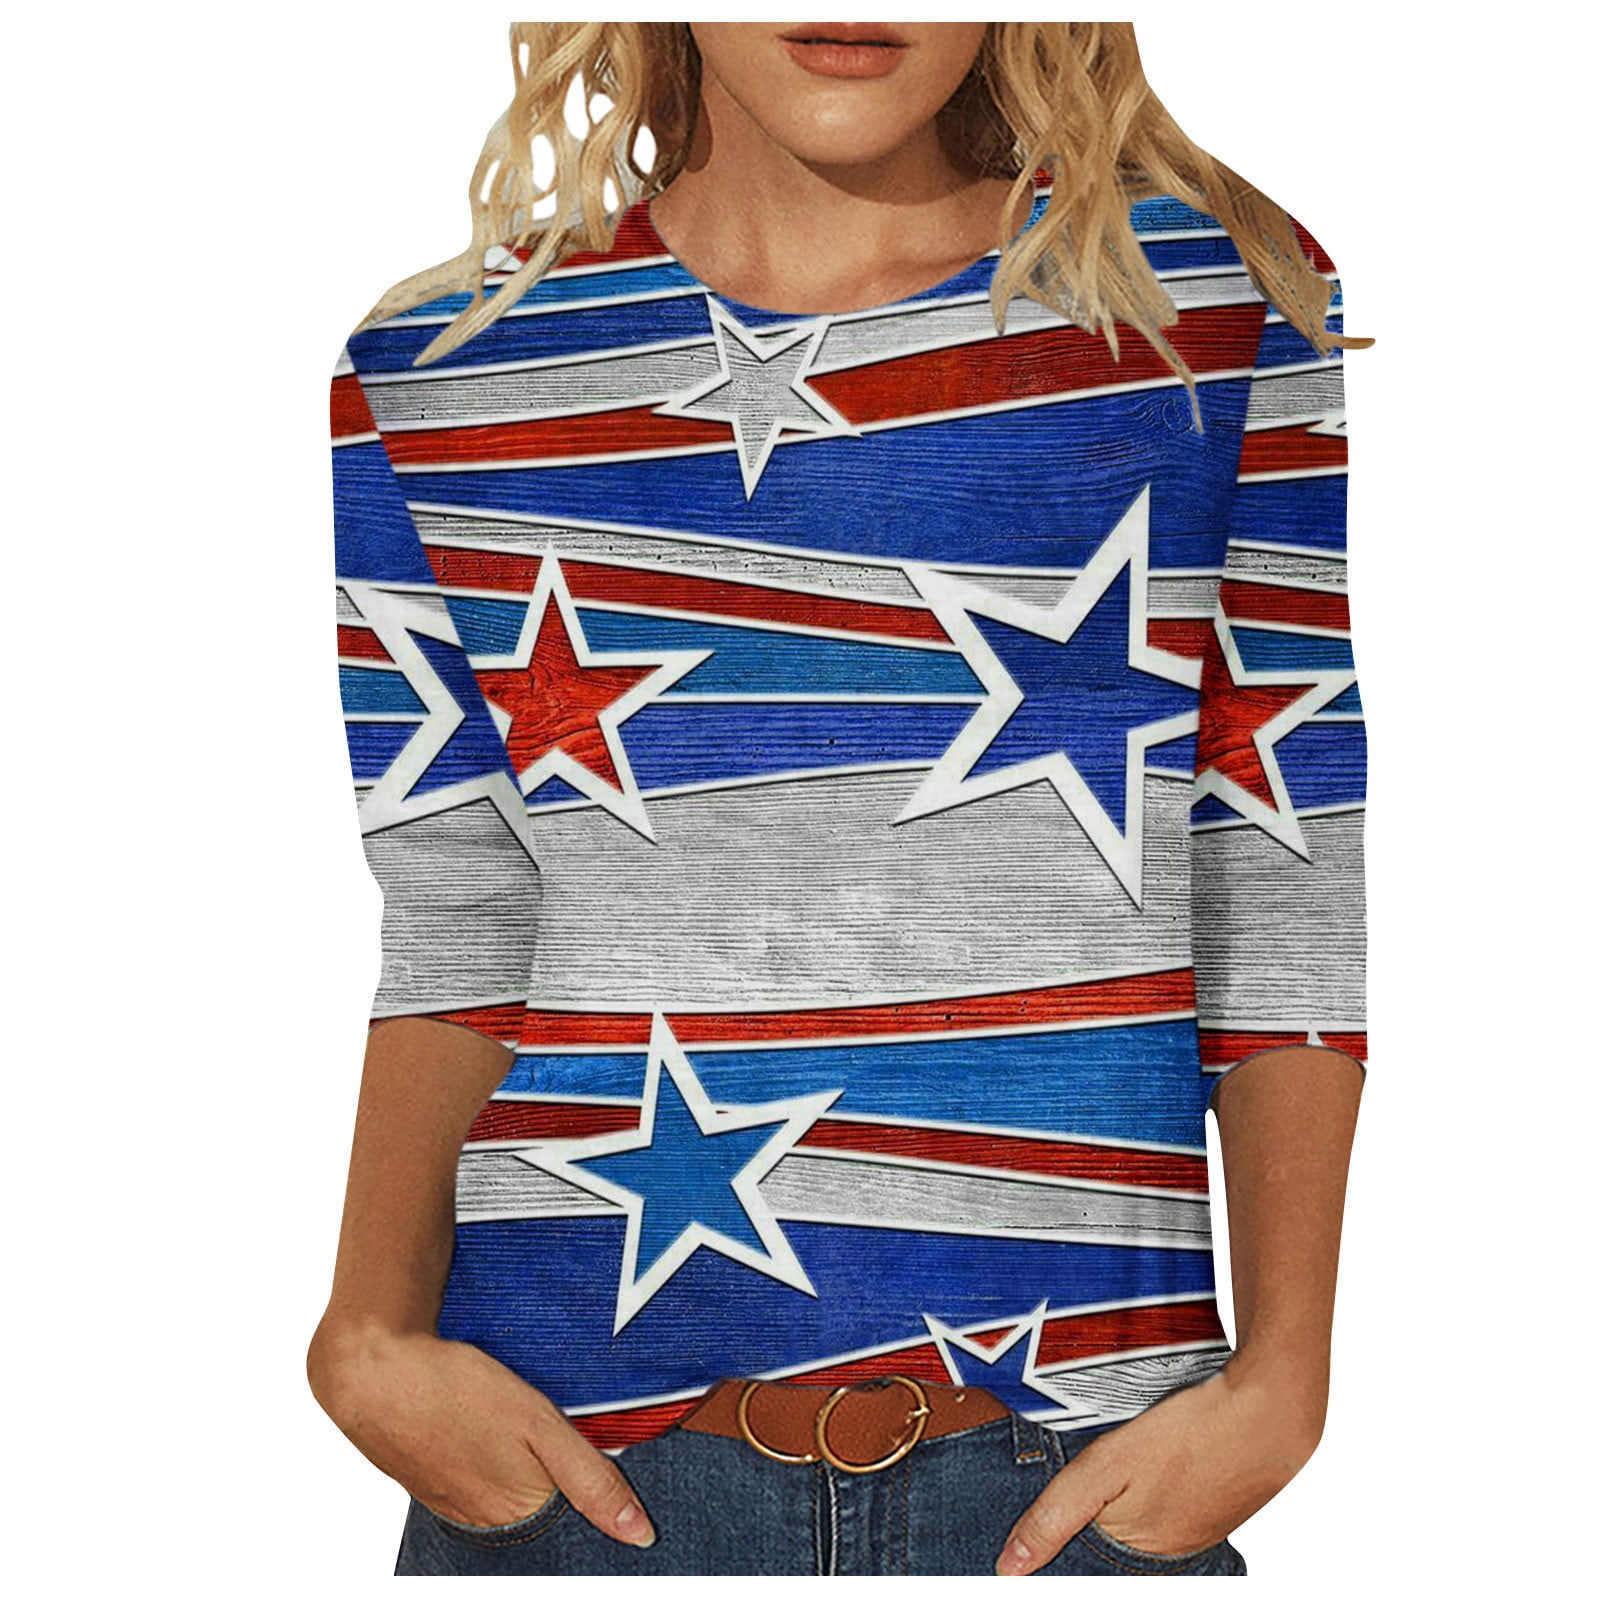 Fanxing Women American Flag Shirt 4th of July Patriotic Pride T-Shirt 3/4 Sleeve  Casual Blouse Summer Short Sleeve Tee Clothes S,M,L,XL,XXL